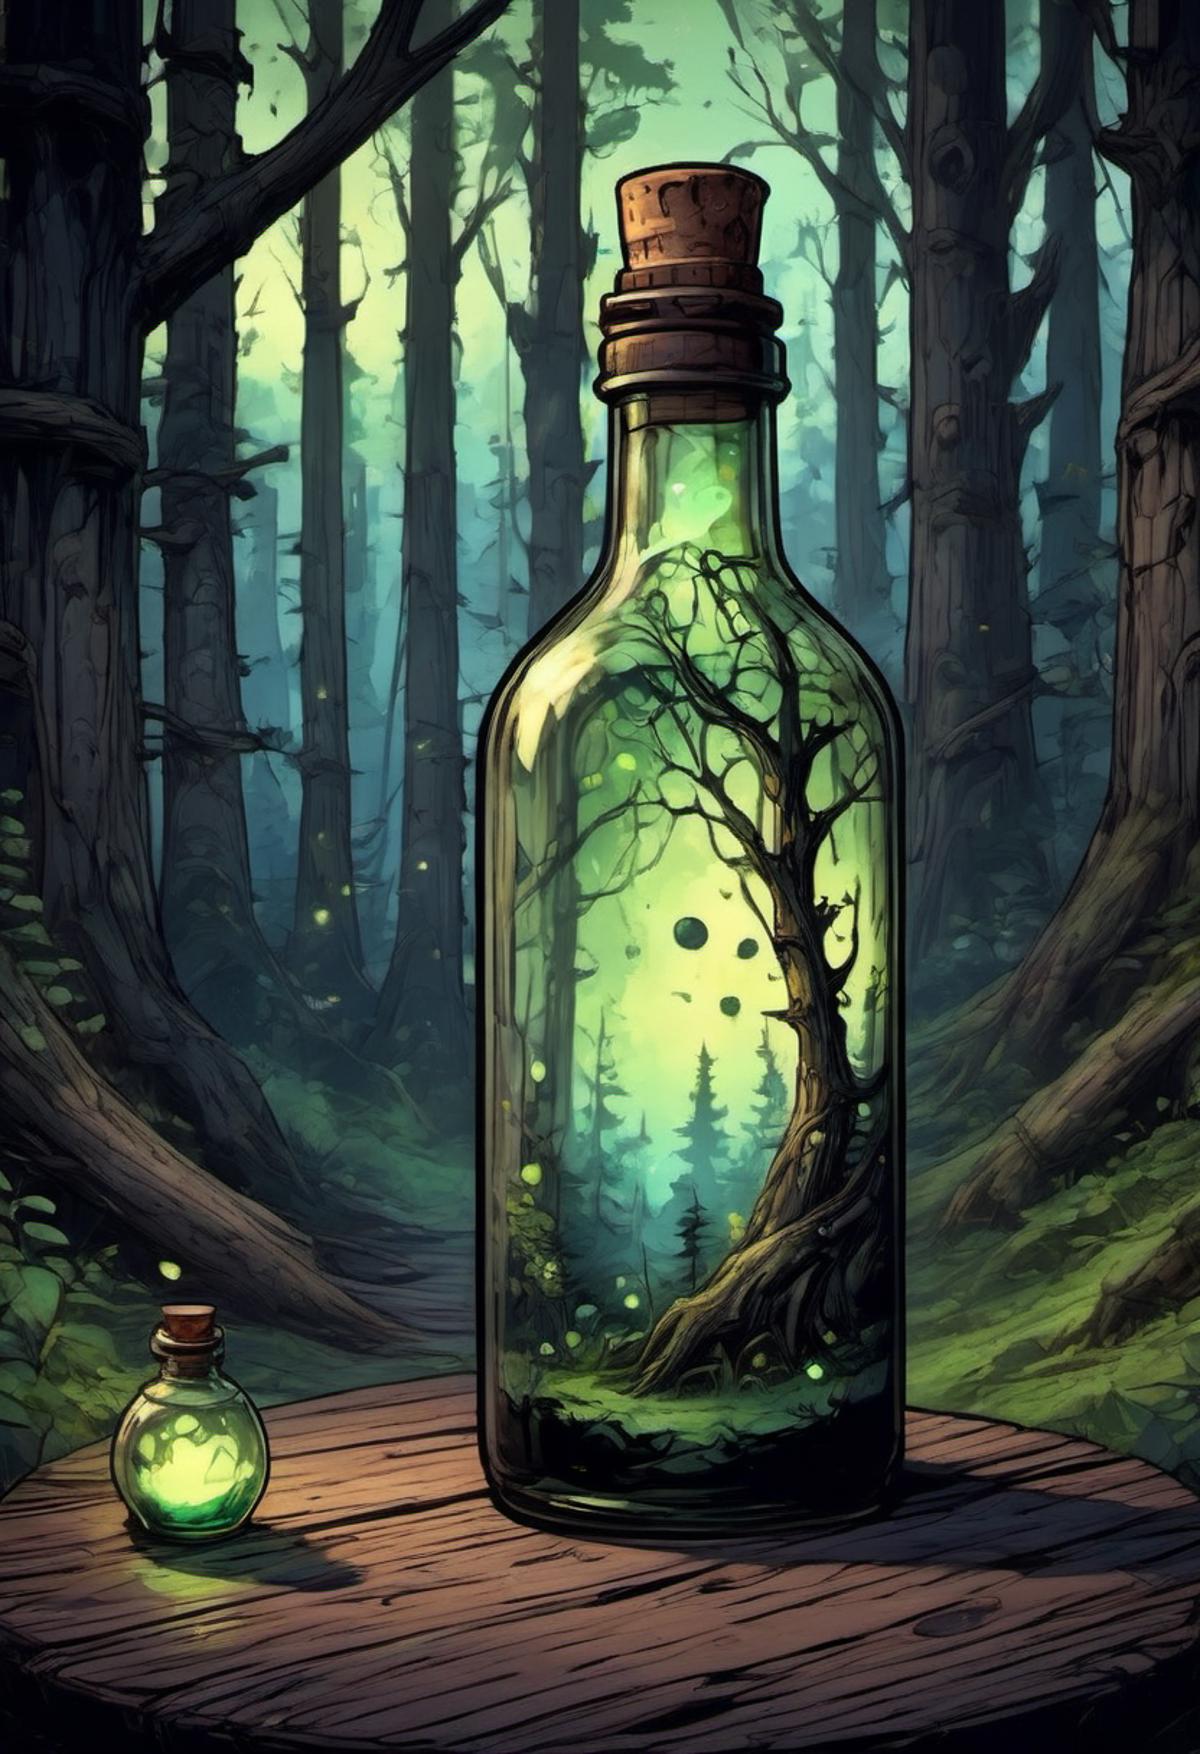 A bottle of green liquid with a tree inside, sitting on a wooden table.